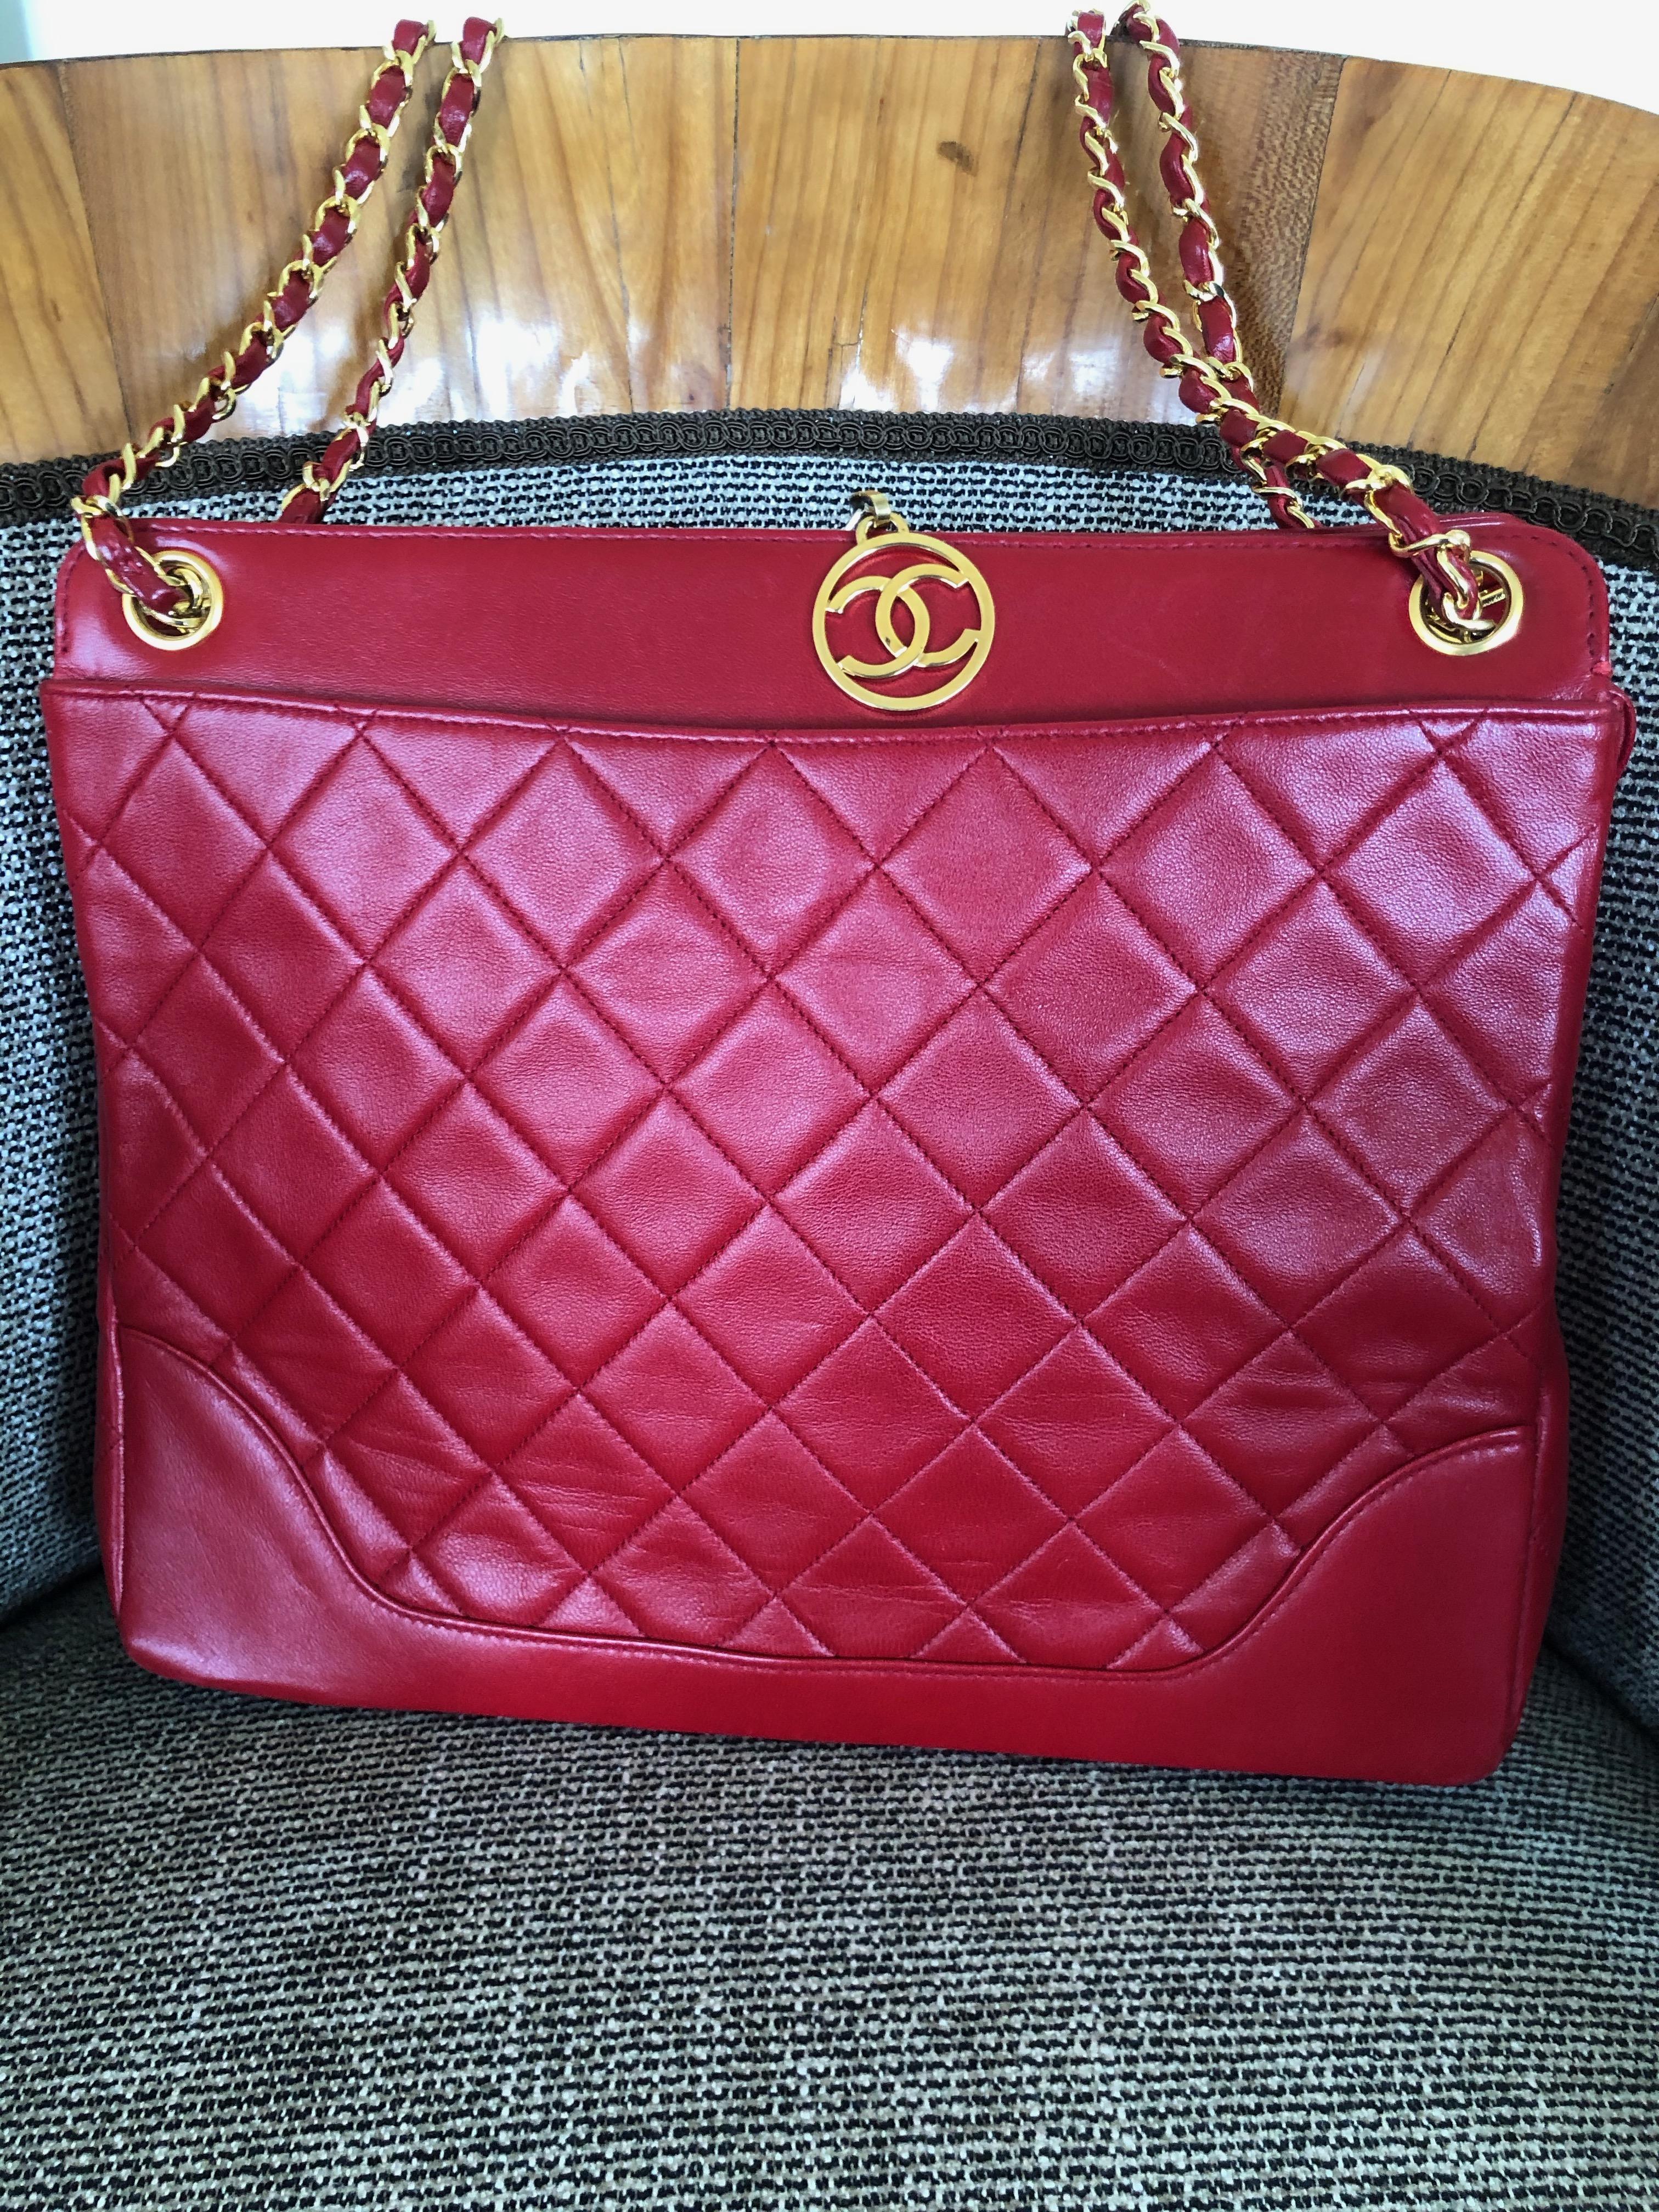 Women's or Men's Chanel Tomato Red Vintage Lambskin Leather Quilted Tote Bag with Gold Hardware For Sale